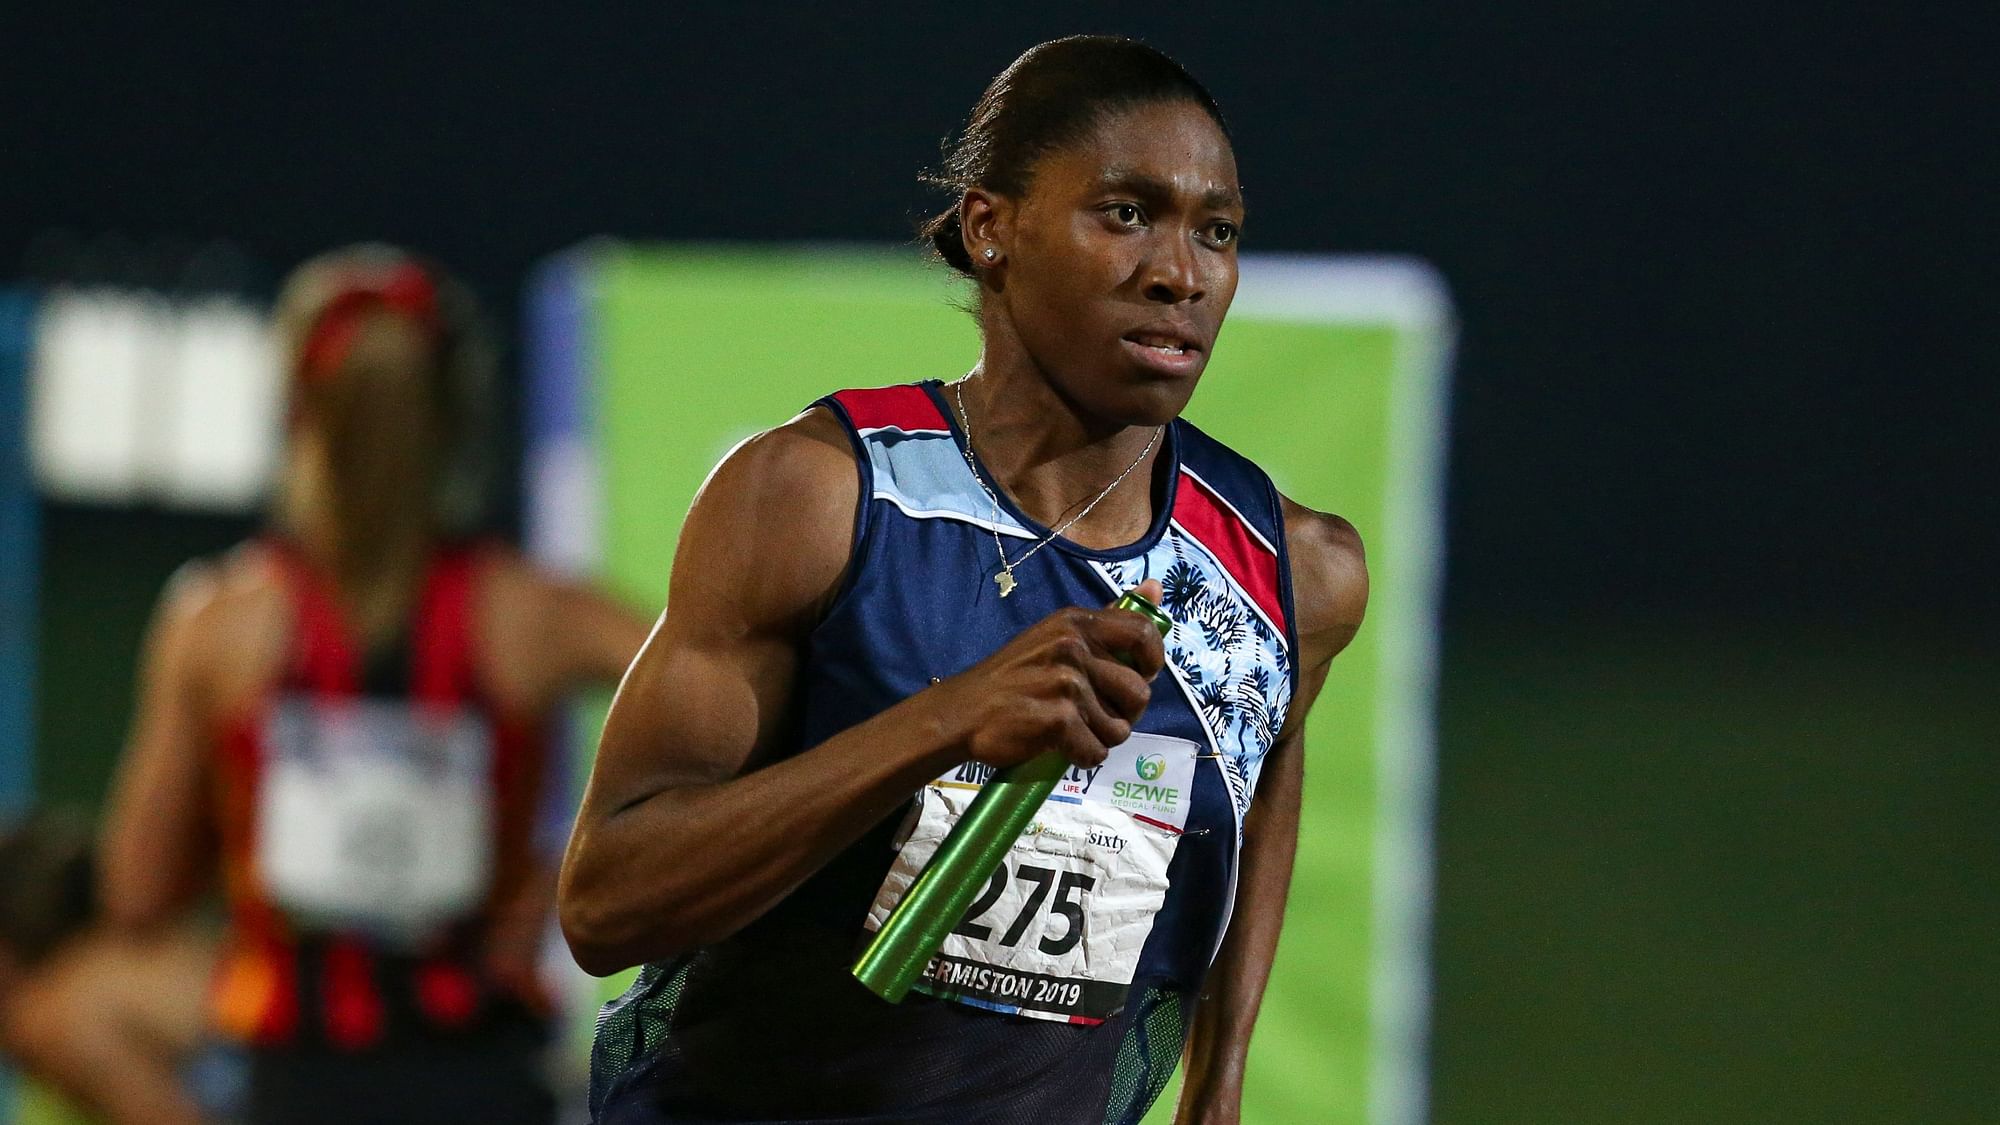 Amid news of the gross invasion of privacy that she underwent, Semenya won the world title in 2009.